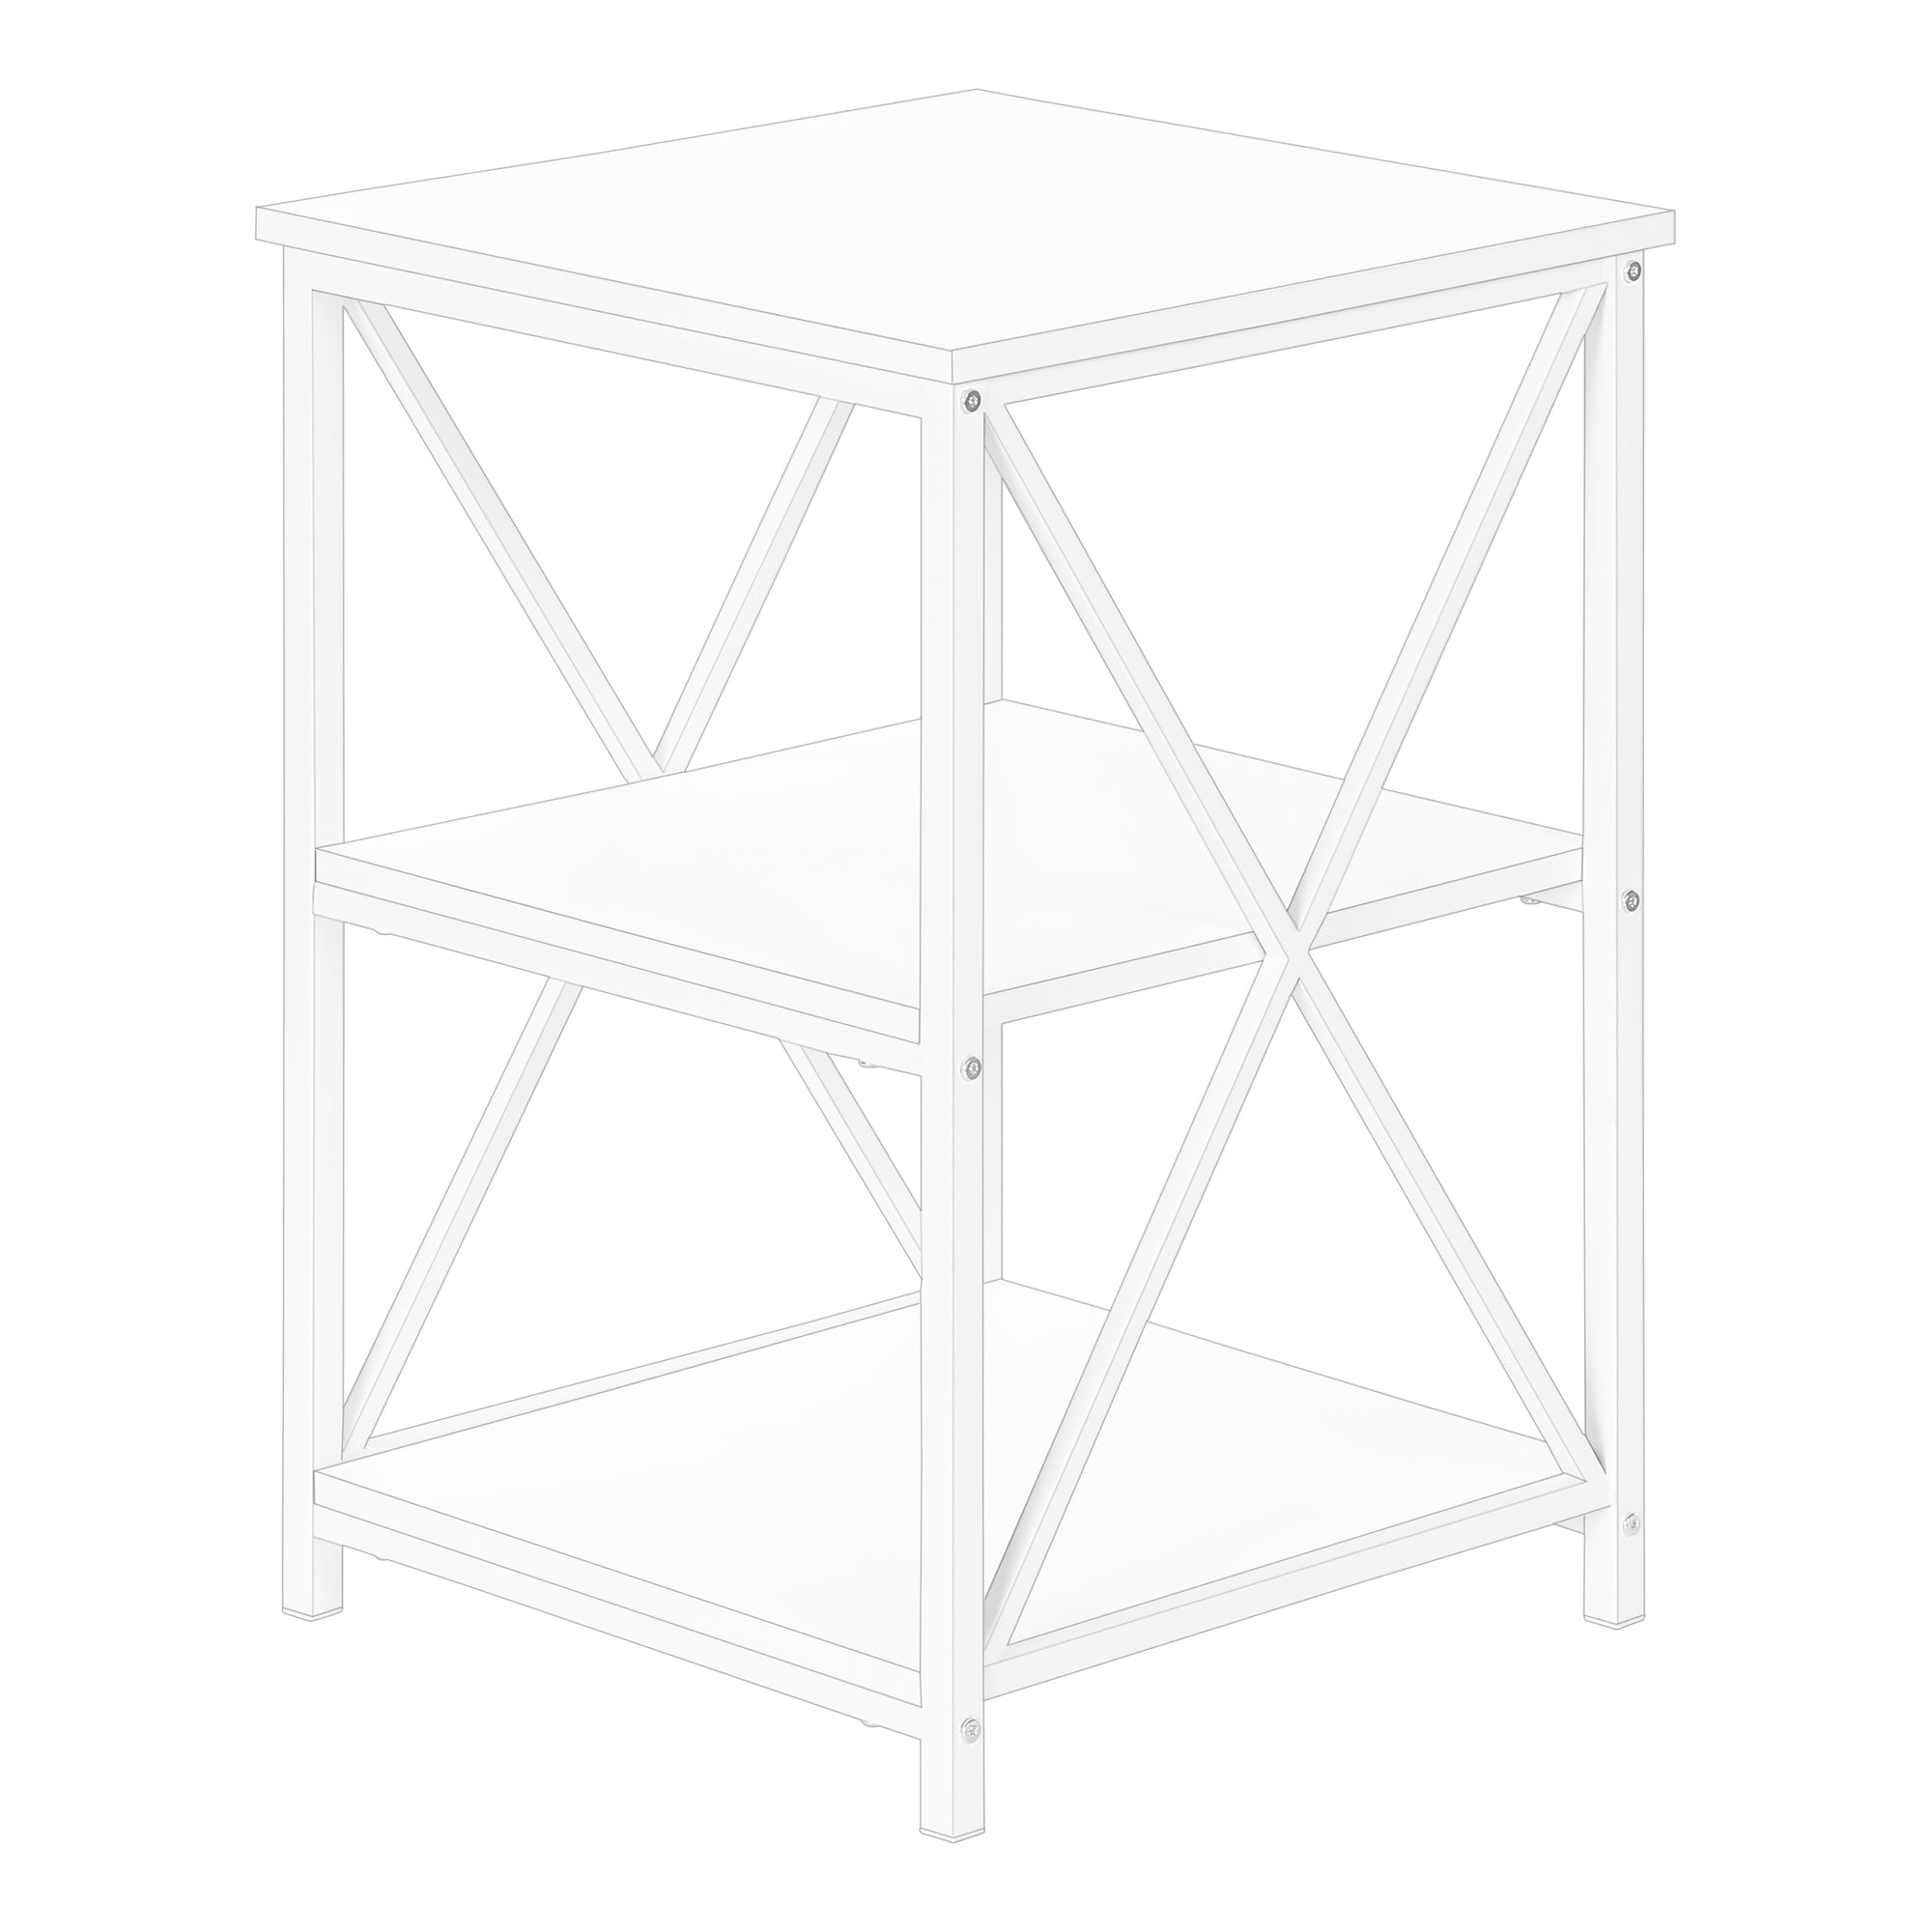 MN-573599    Accent Table, Side, End, Nightstand, Lamp, Living Room, Bedroom, Metal Legs, Laminate, White, White, Contemporary, Modern